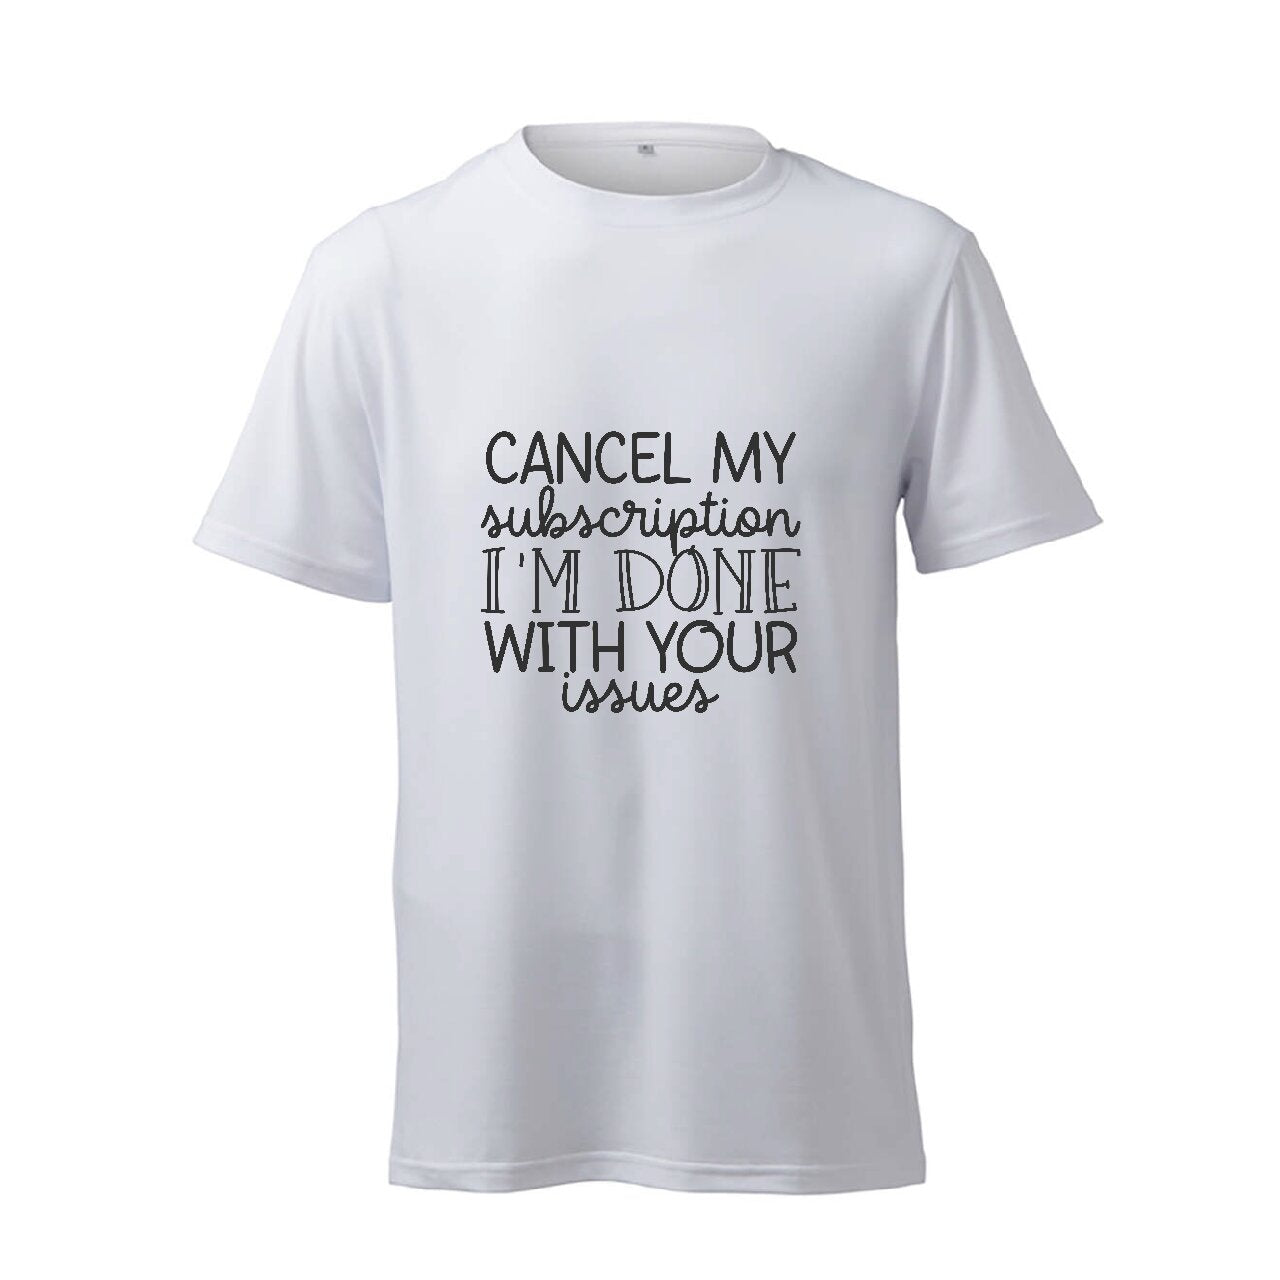 Cancel My Subscription I'm Done With Your Issues - T-Shirt